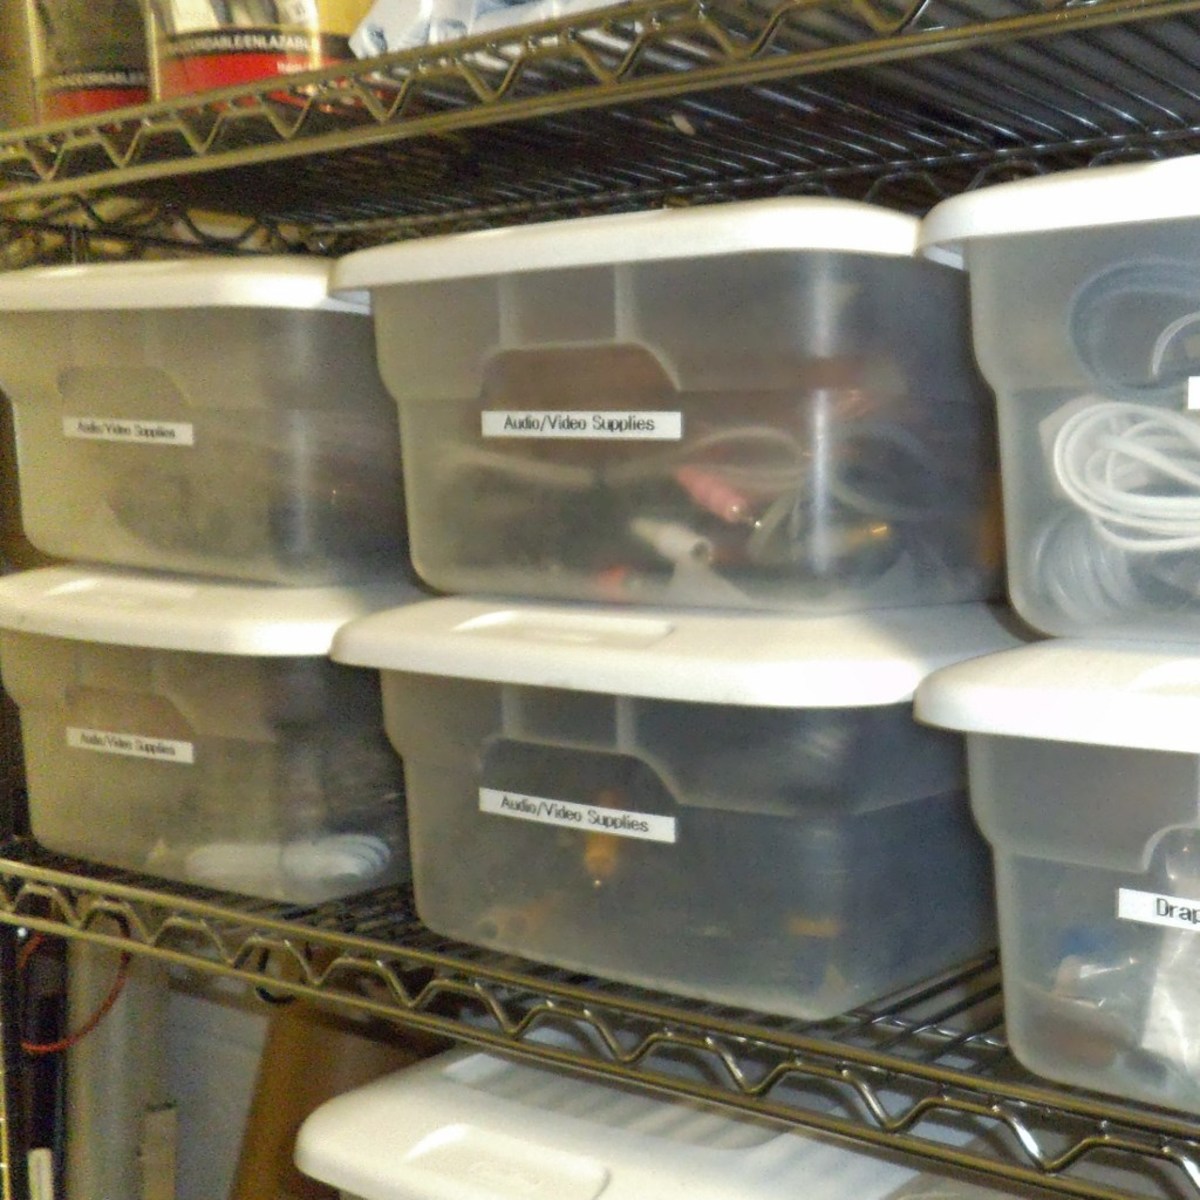 Label stored items.